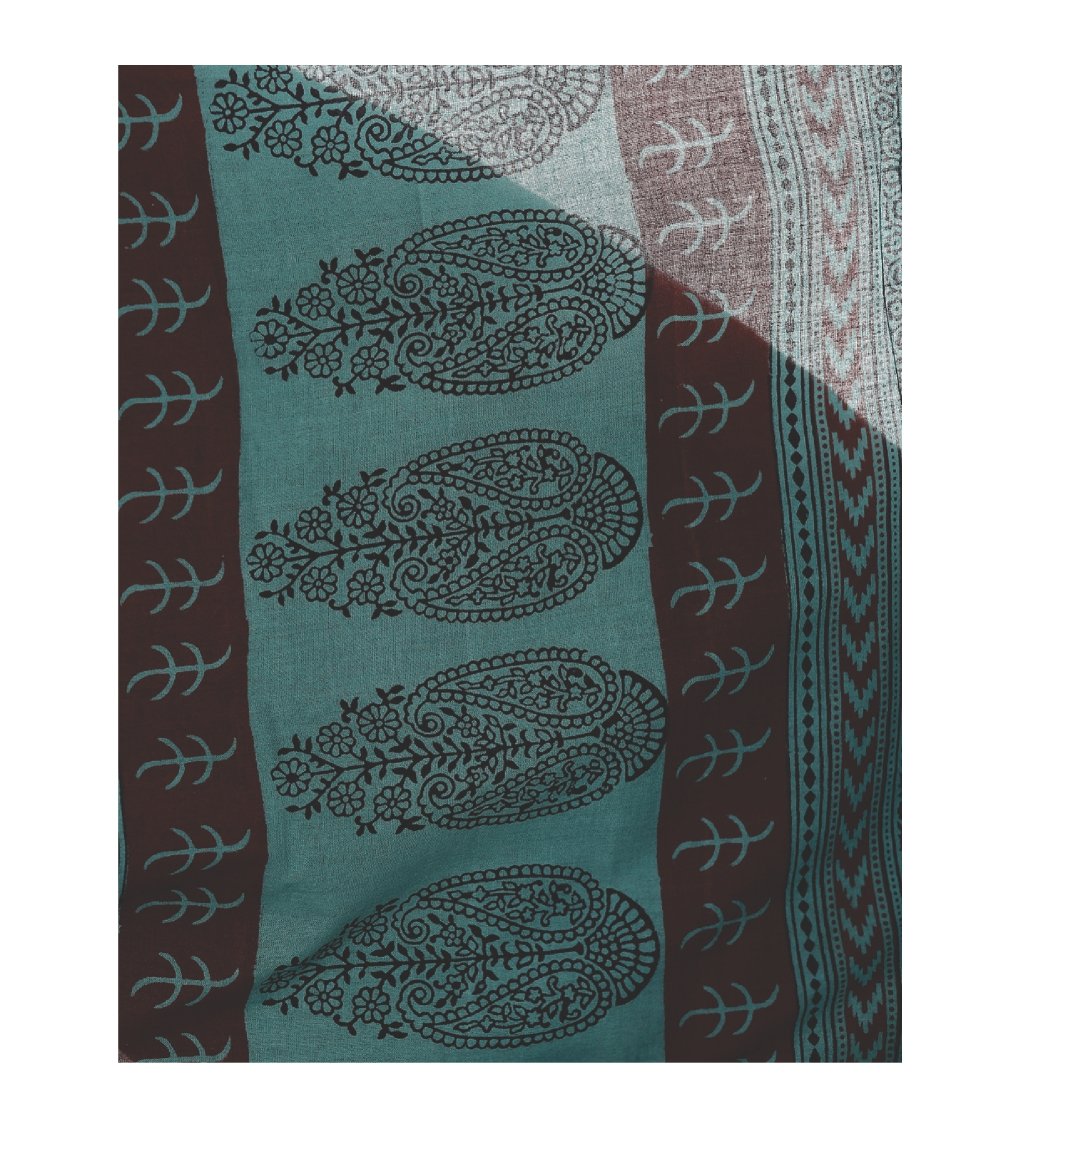 Kalakari India Teal Green Bagh Handblock Print Handcrafted Cotton Saree-Saree-Kalakari India-ZIBASA0020-Bagh, Cotton, Geographical Indication, Hand Blocks, Hand Crafted, Heritage Prints, Natural Dyes, Sarees, Sustainable Fabrics-[Linen,Ethnic,wear,Fashionista,Handloom,Handicraft,Indigo,blockprint,block,print,Cotton,Chanderi,Blue, latest,classy,party,bollywood,trendy,summer,style,traditional,formal,elegant,unique,style,hand,block,print, dabu,booti,gift,present,glamorous,affordable,collectible,Sar